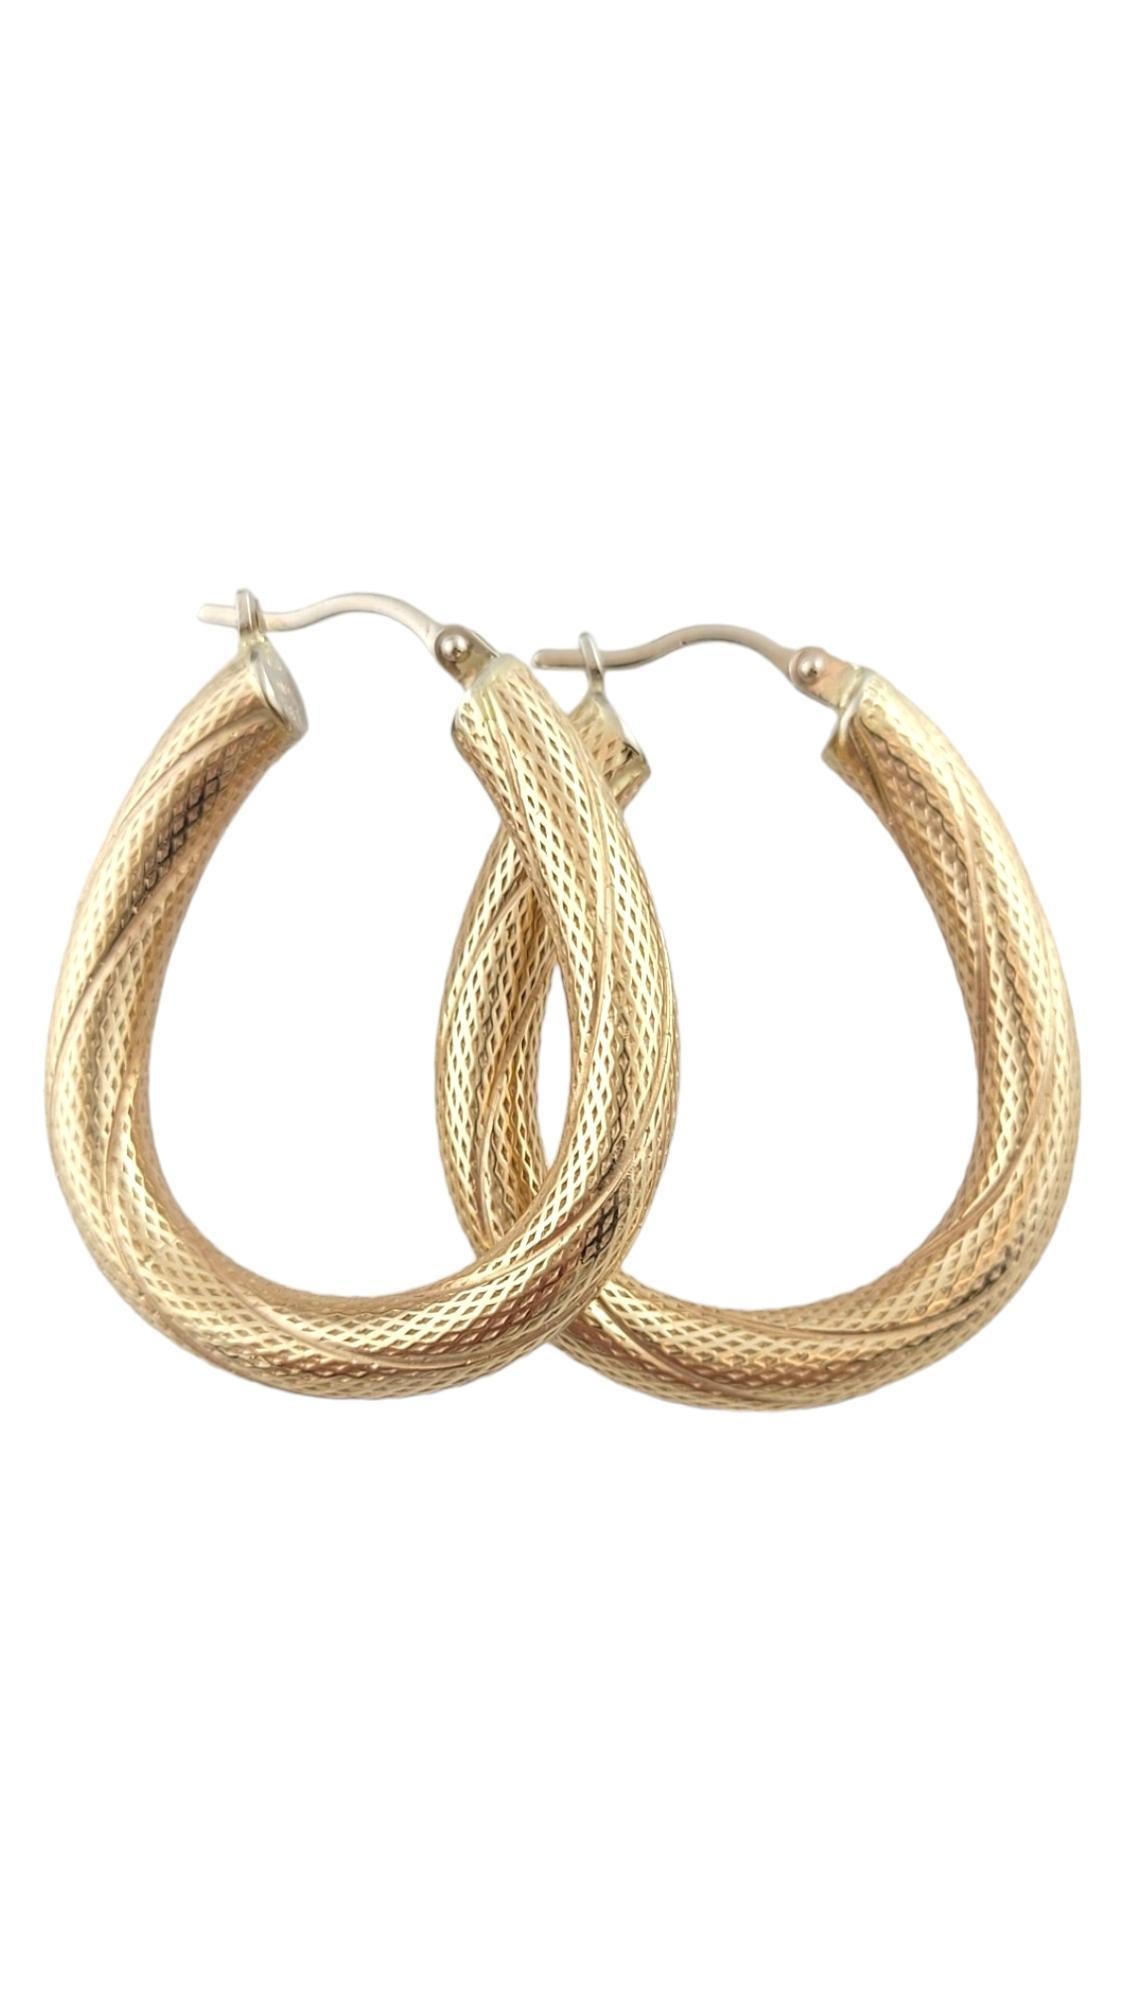 14K Yellow Gold Textured Hoop Earrings #16192 In Good Condition For Sale In Washington Depot, CT